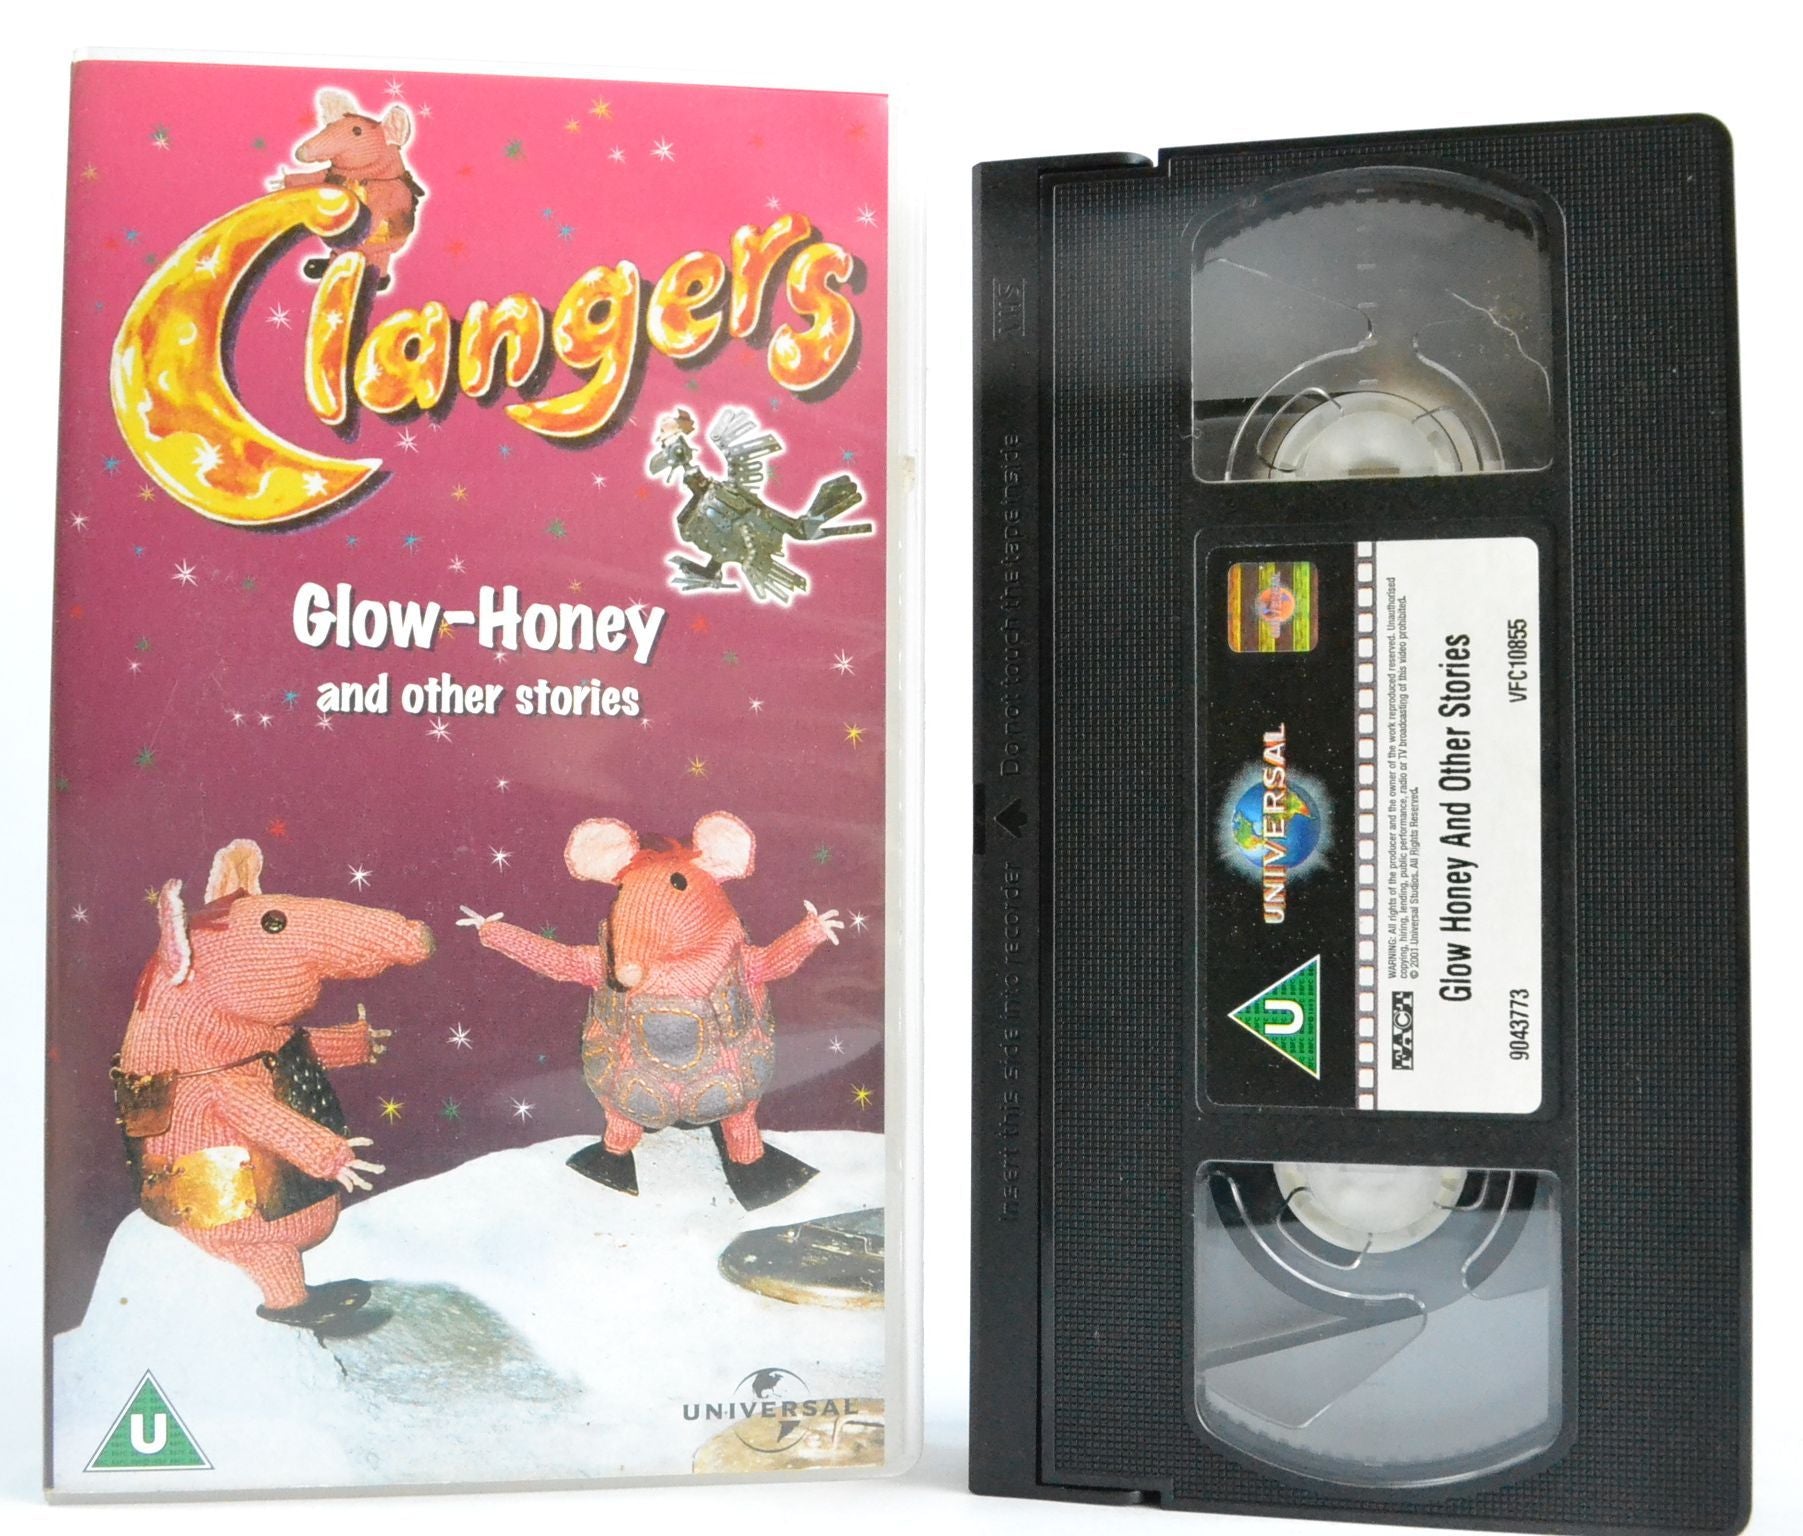 Clangers: Glow-Honey - The Seed - The Music Of The Spheres (1970) Kids - VHS-